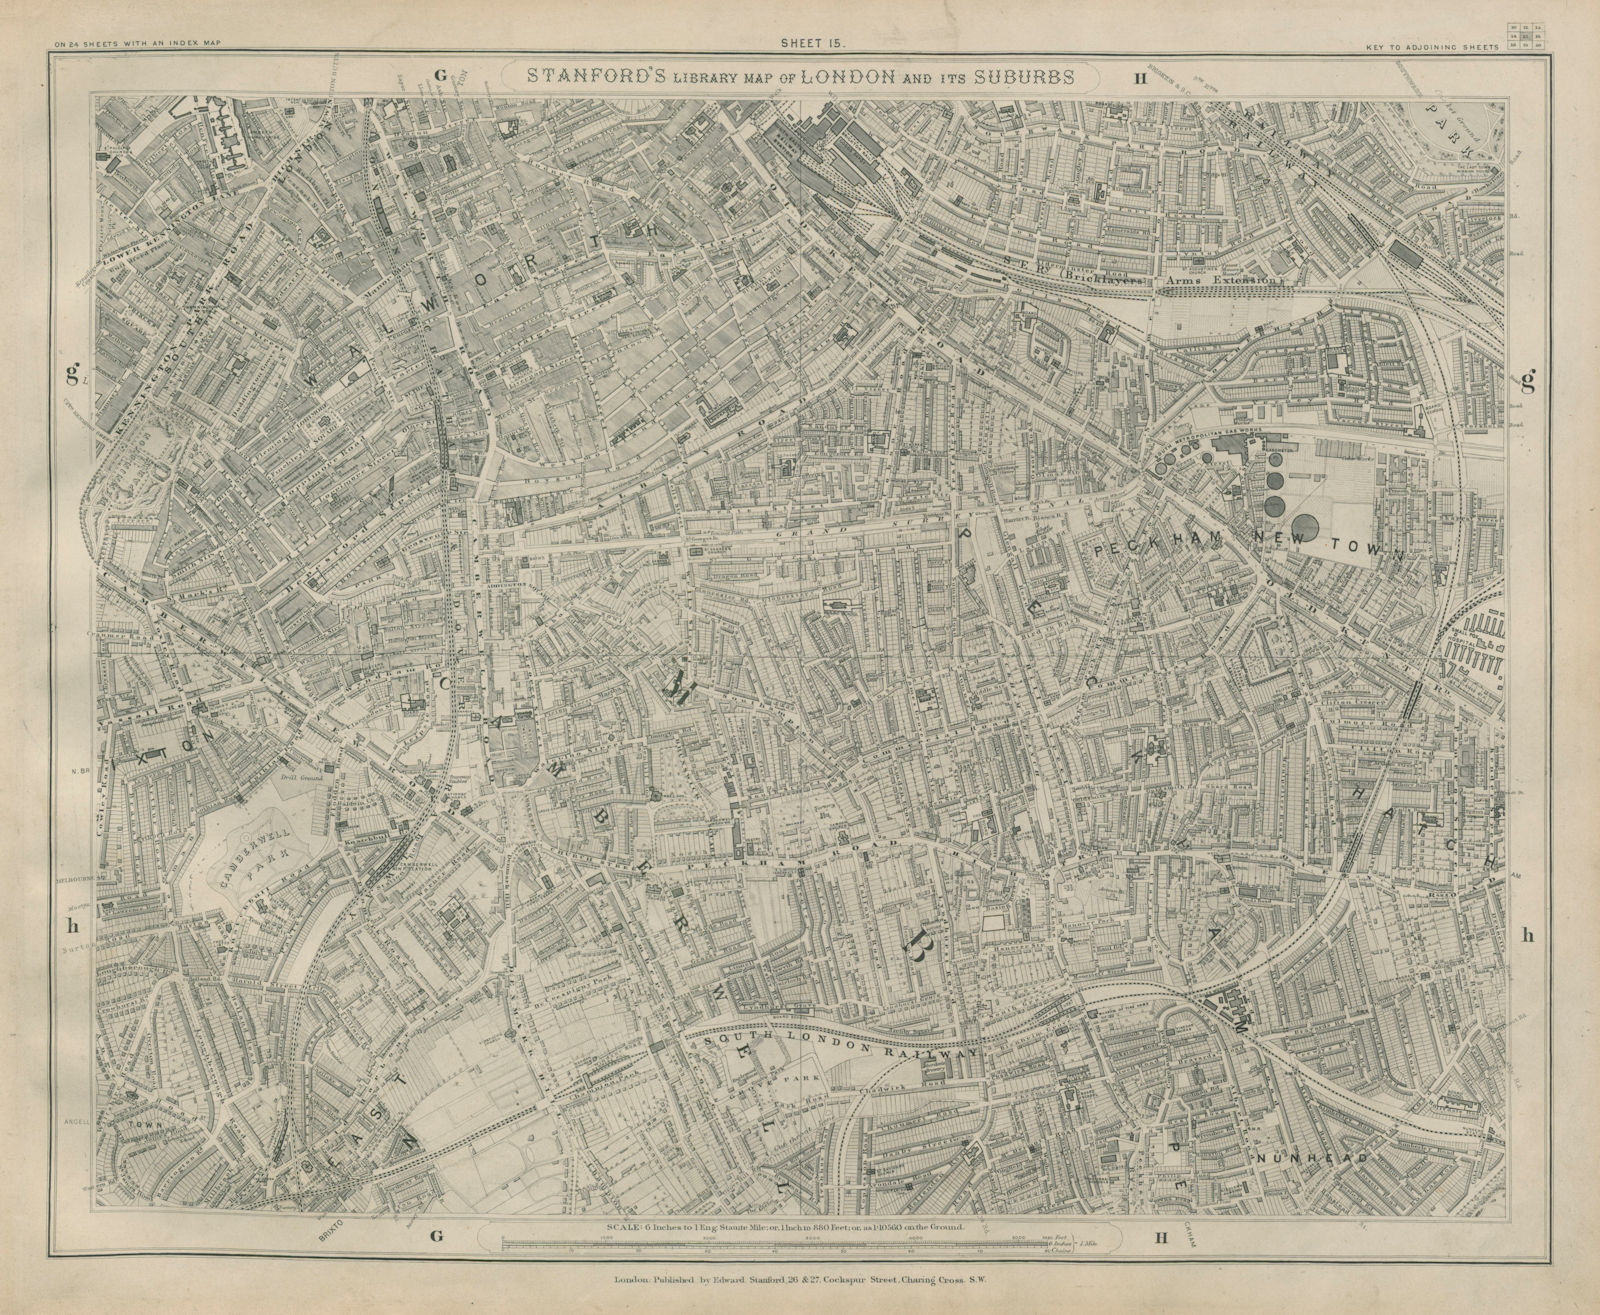 Associate Product Stanford Library map of London Sheet 15 Walworth Camberwell Peckham 1895